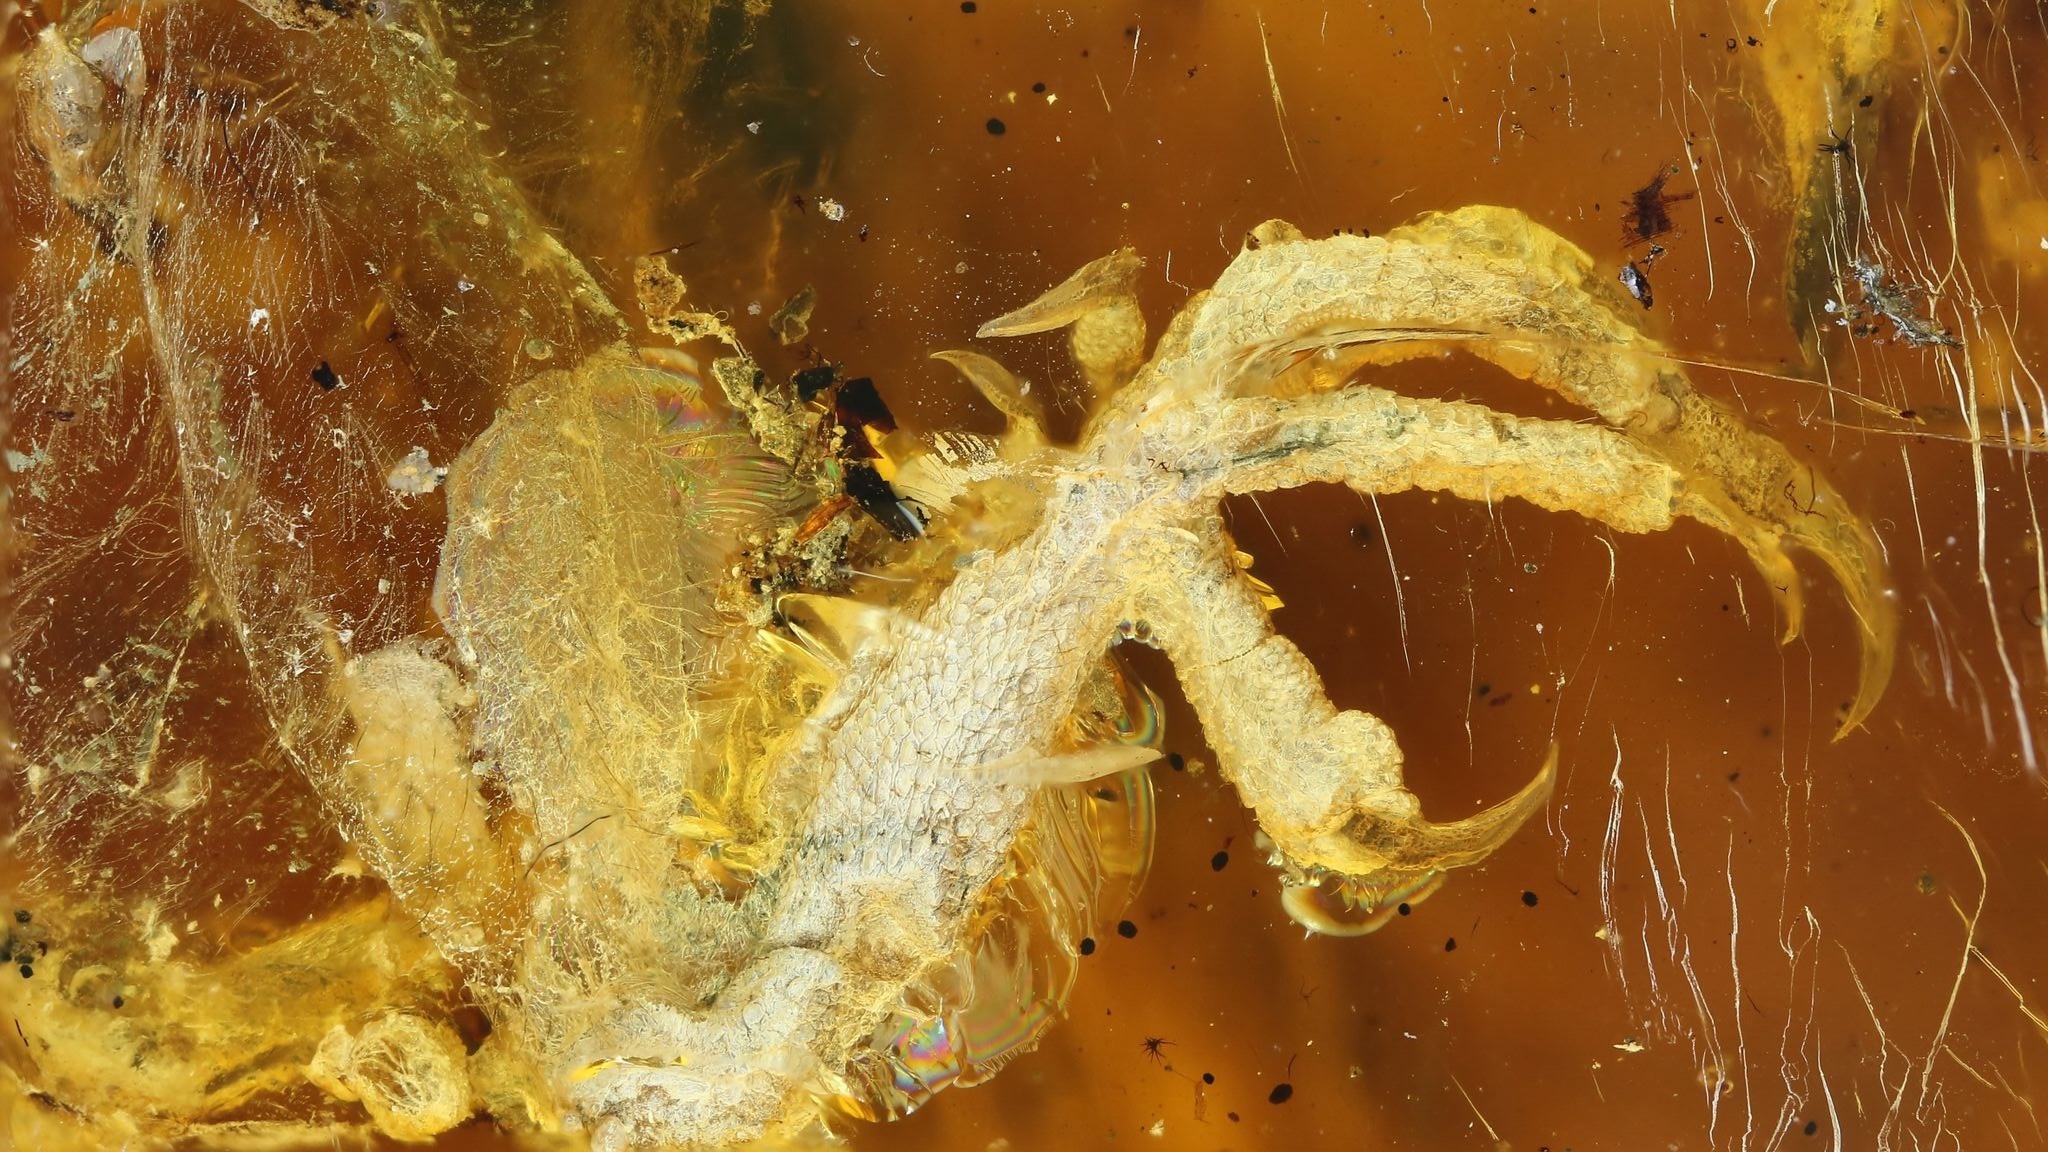 Scientists Find 100 Million-Year-Old, Nearly Complete Baby Bird Trapped In Amber